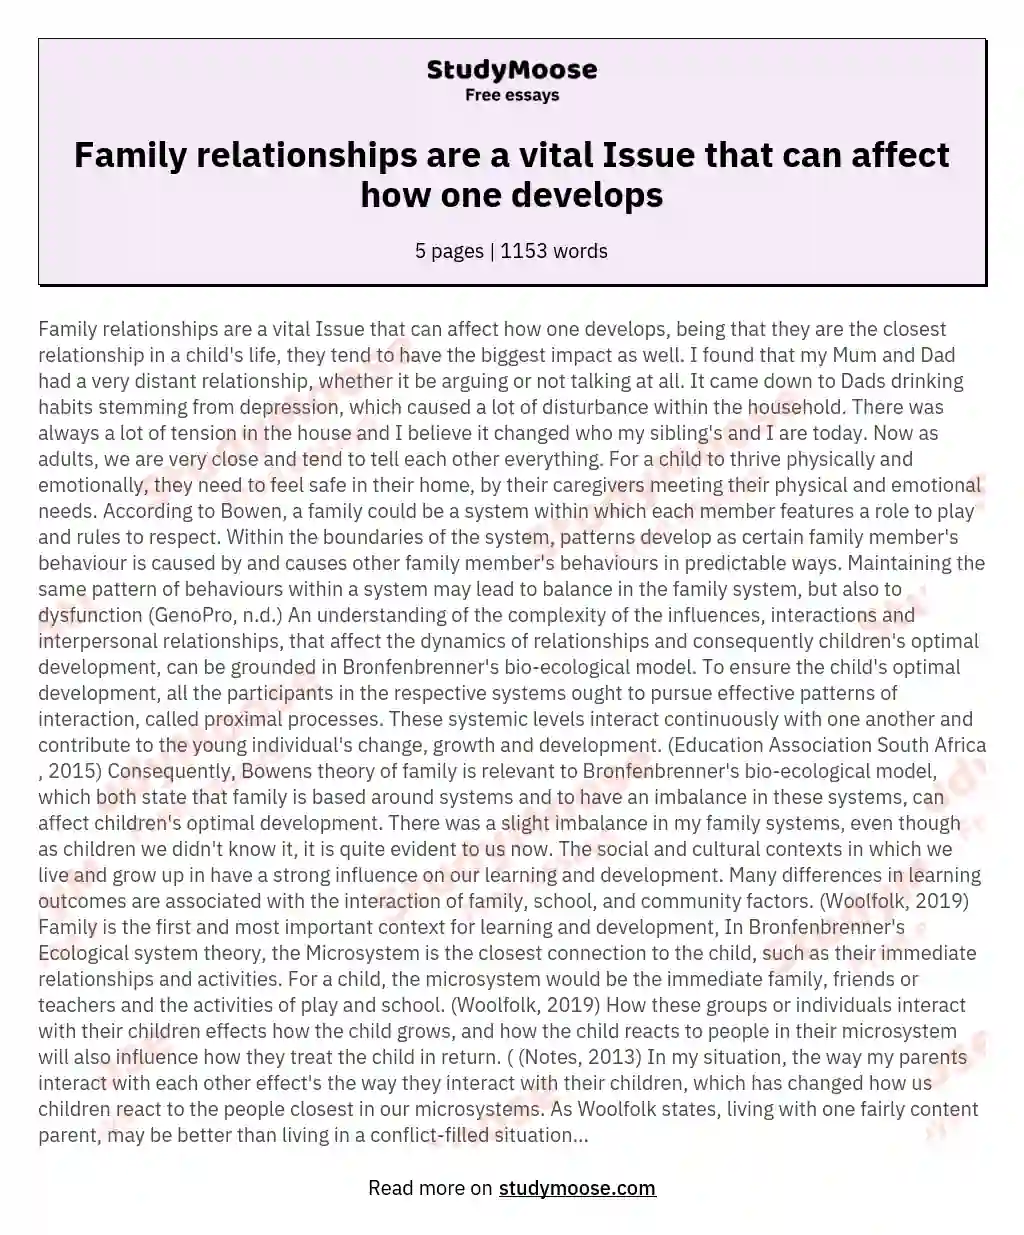 Family relationships are a vital Issue that can affect how one develops